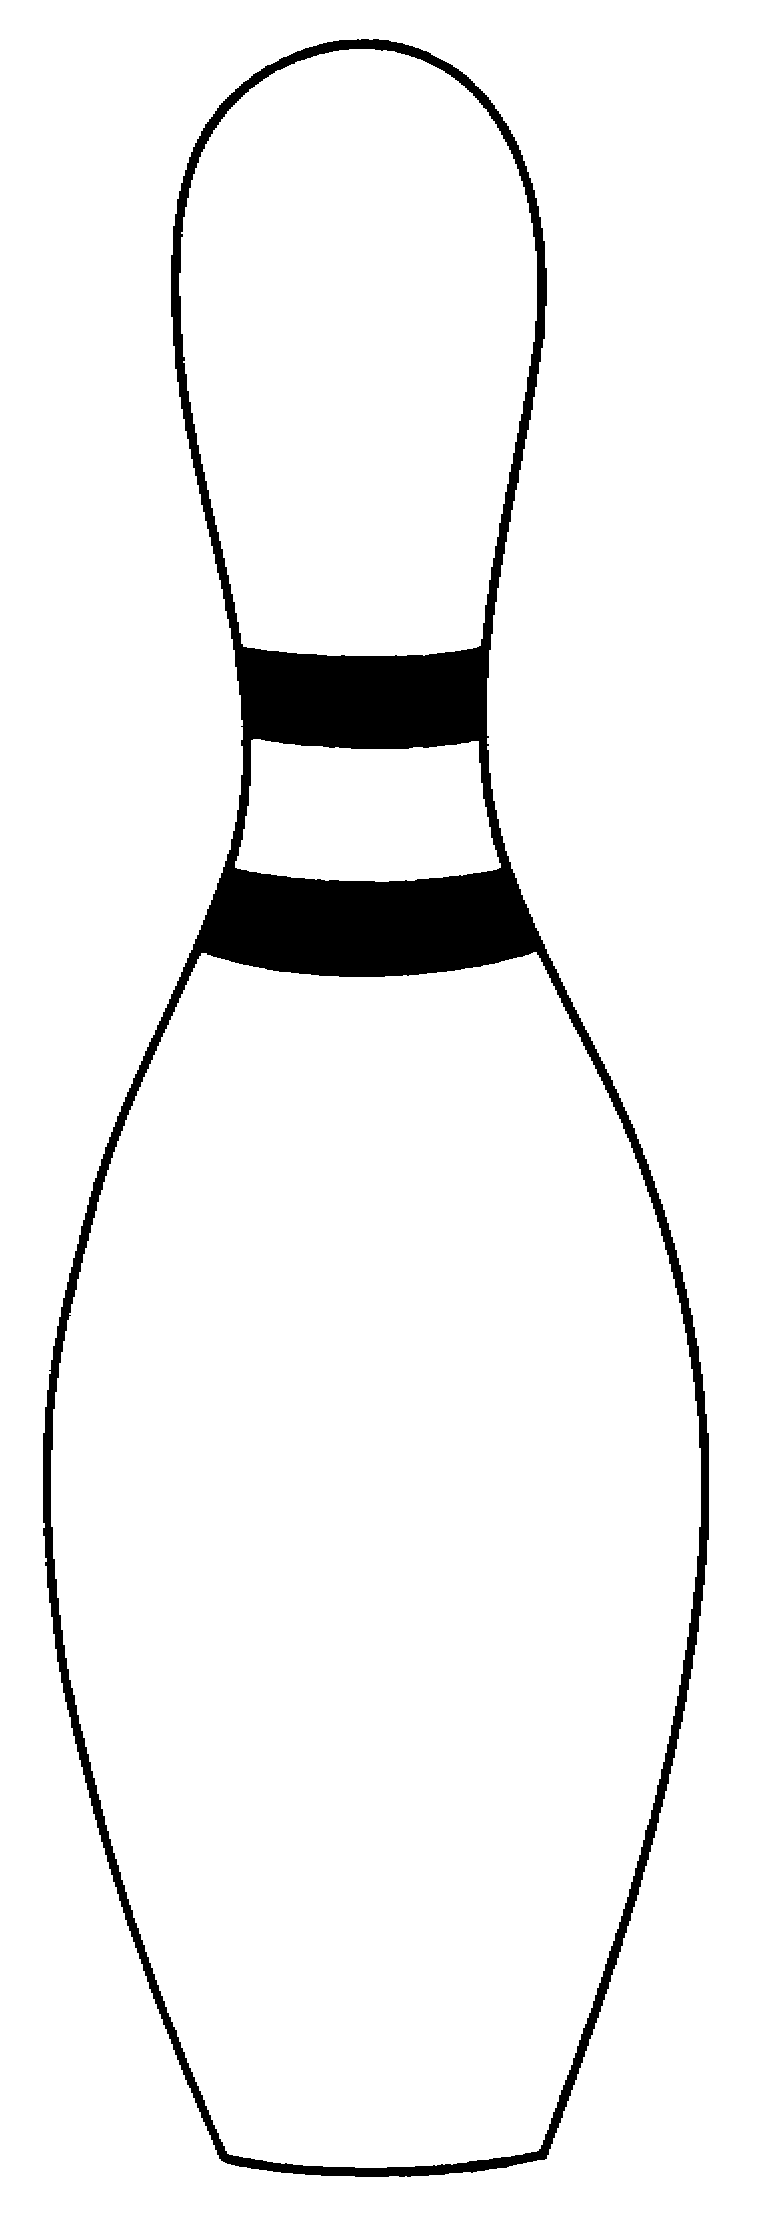 Bowling Pin Template Cliparts Co - Riset